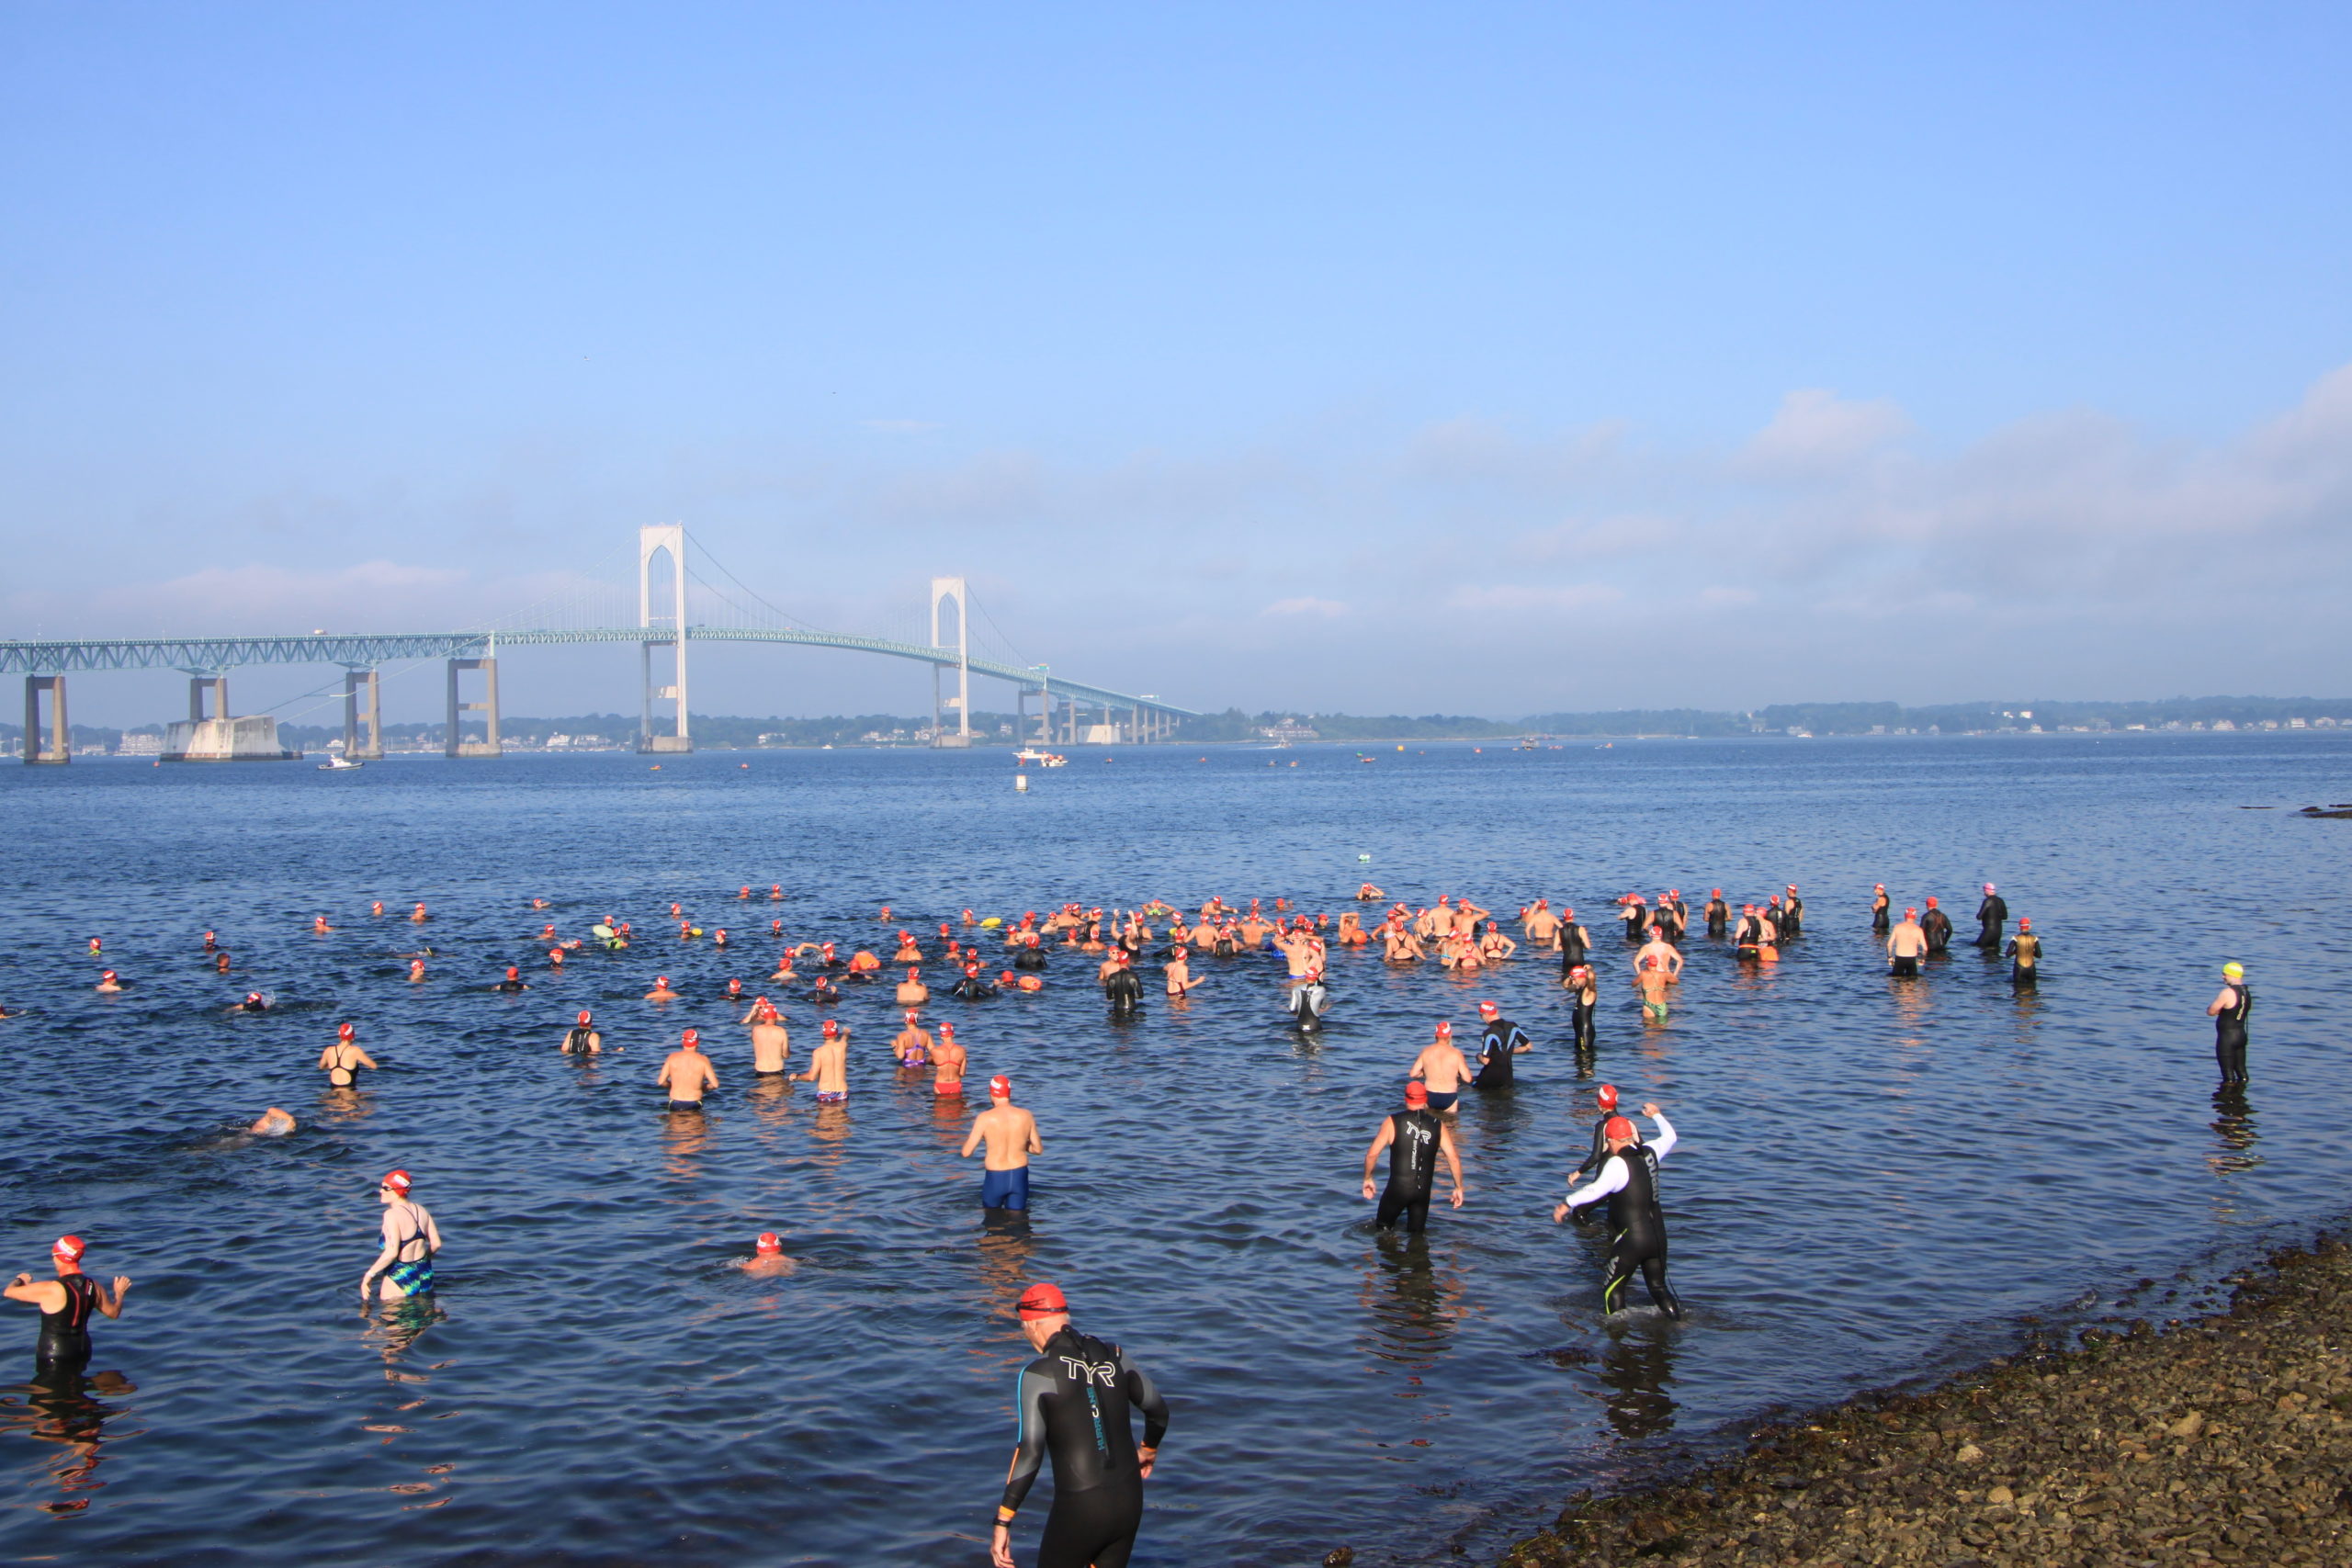 The first wave of swimmers prepares to depart from the Newport shore during the 2022 Save The Bay Swim. The Newport Bridge is visible in the background, as is the Jamestown shoreline.